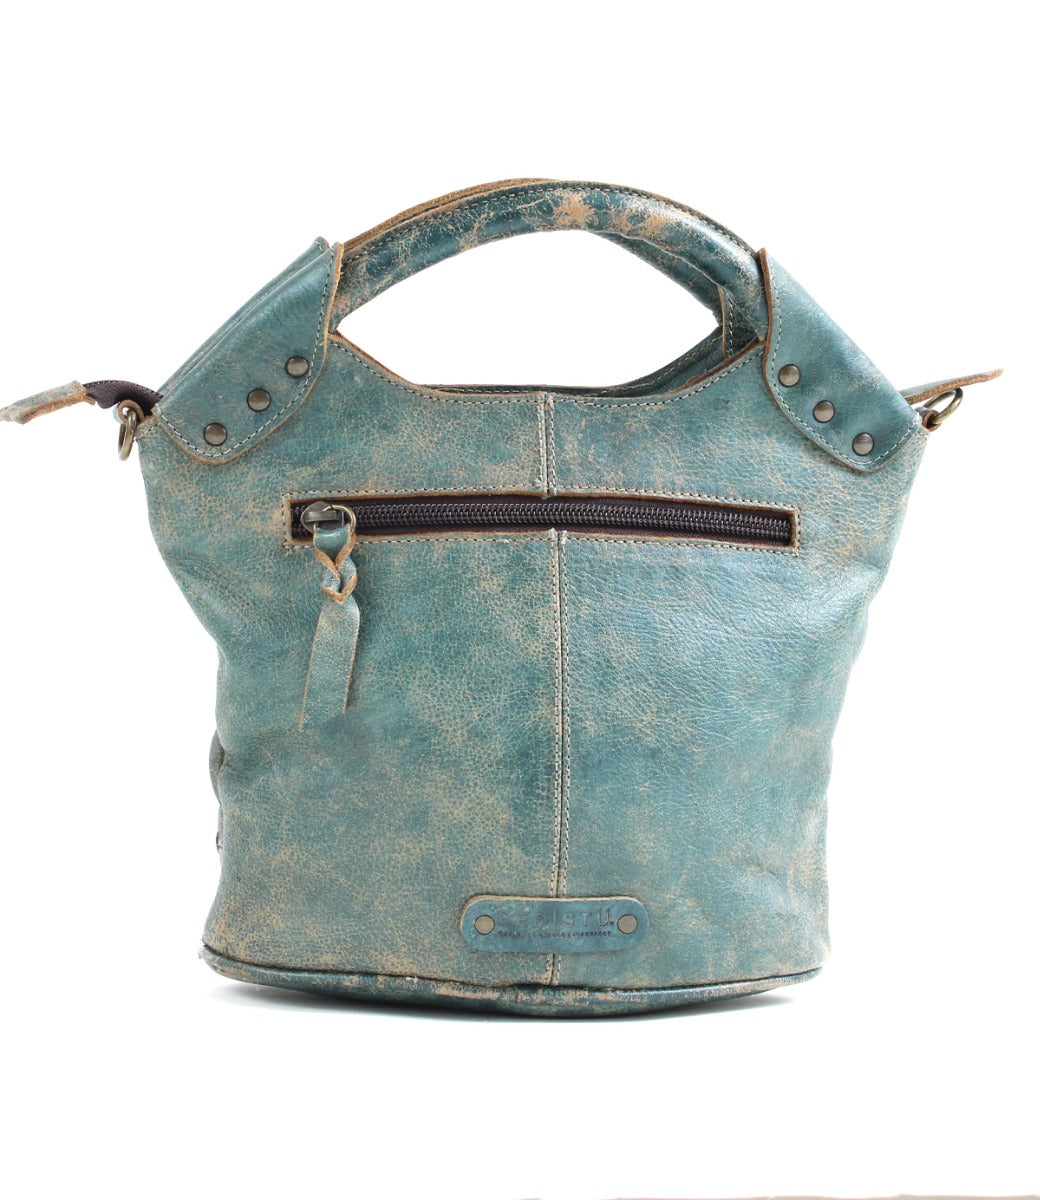 A Delilah handbag by Bed Stu, made of blue leather and featuring a zipper.